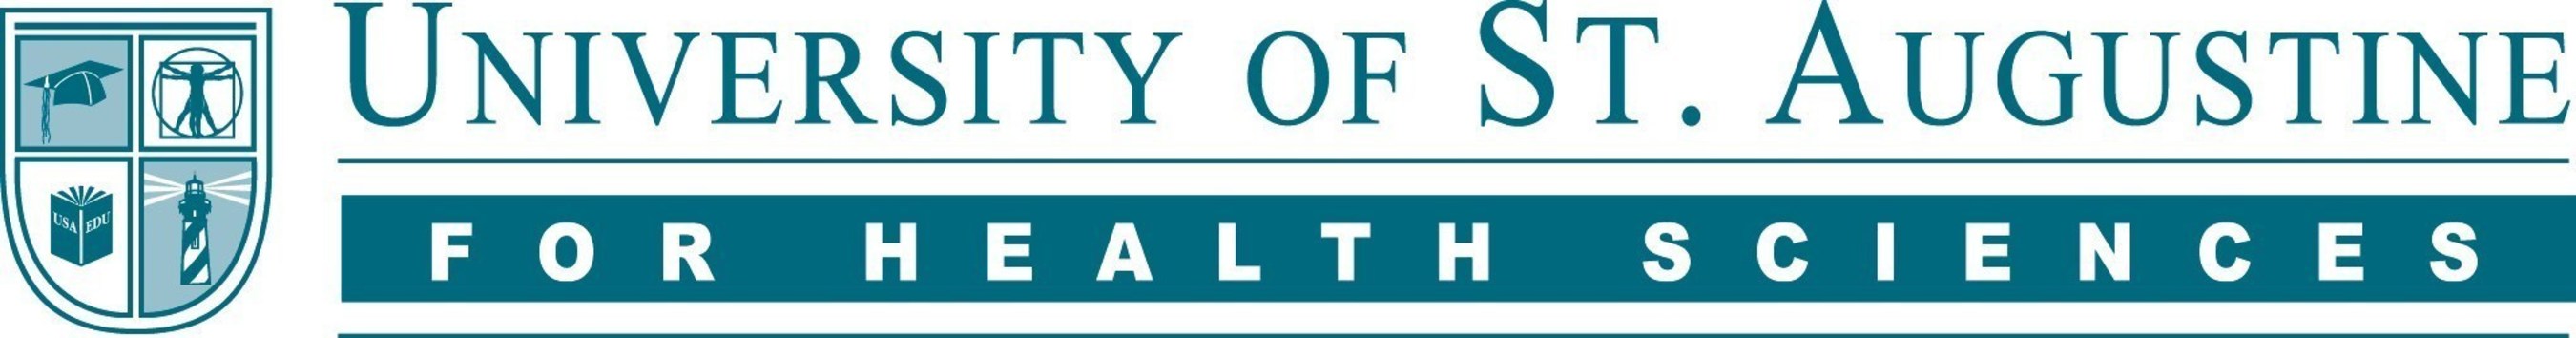 The University of St. Augustine for Health Sciences (USAHS) is a graduate institution that emphasizes health science education through innovative quality classroom and distance education. Founded in 1979, USAHS has locations in San Marcos, California; St. Augustine, Florida; Austin, Texas and Miami, Florida. USAHS offers degree programs in physical therapy, occupational therapy, education and health science, as well as continuing education programs. For more information, visit www.usa.edu. USAHS is a...